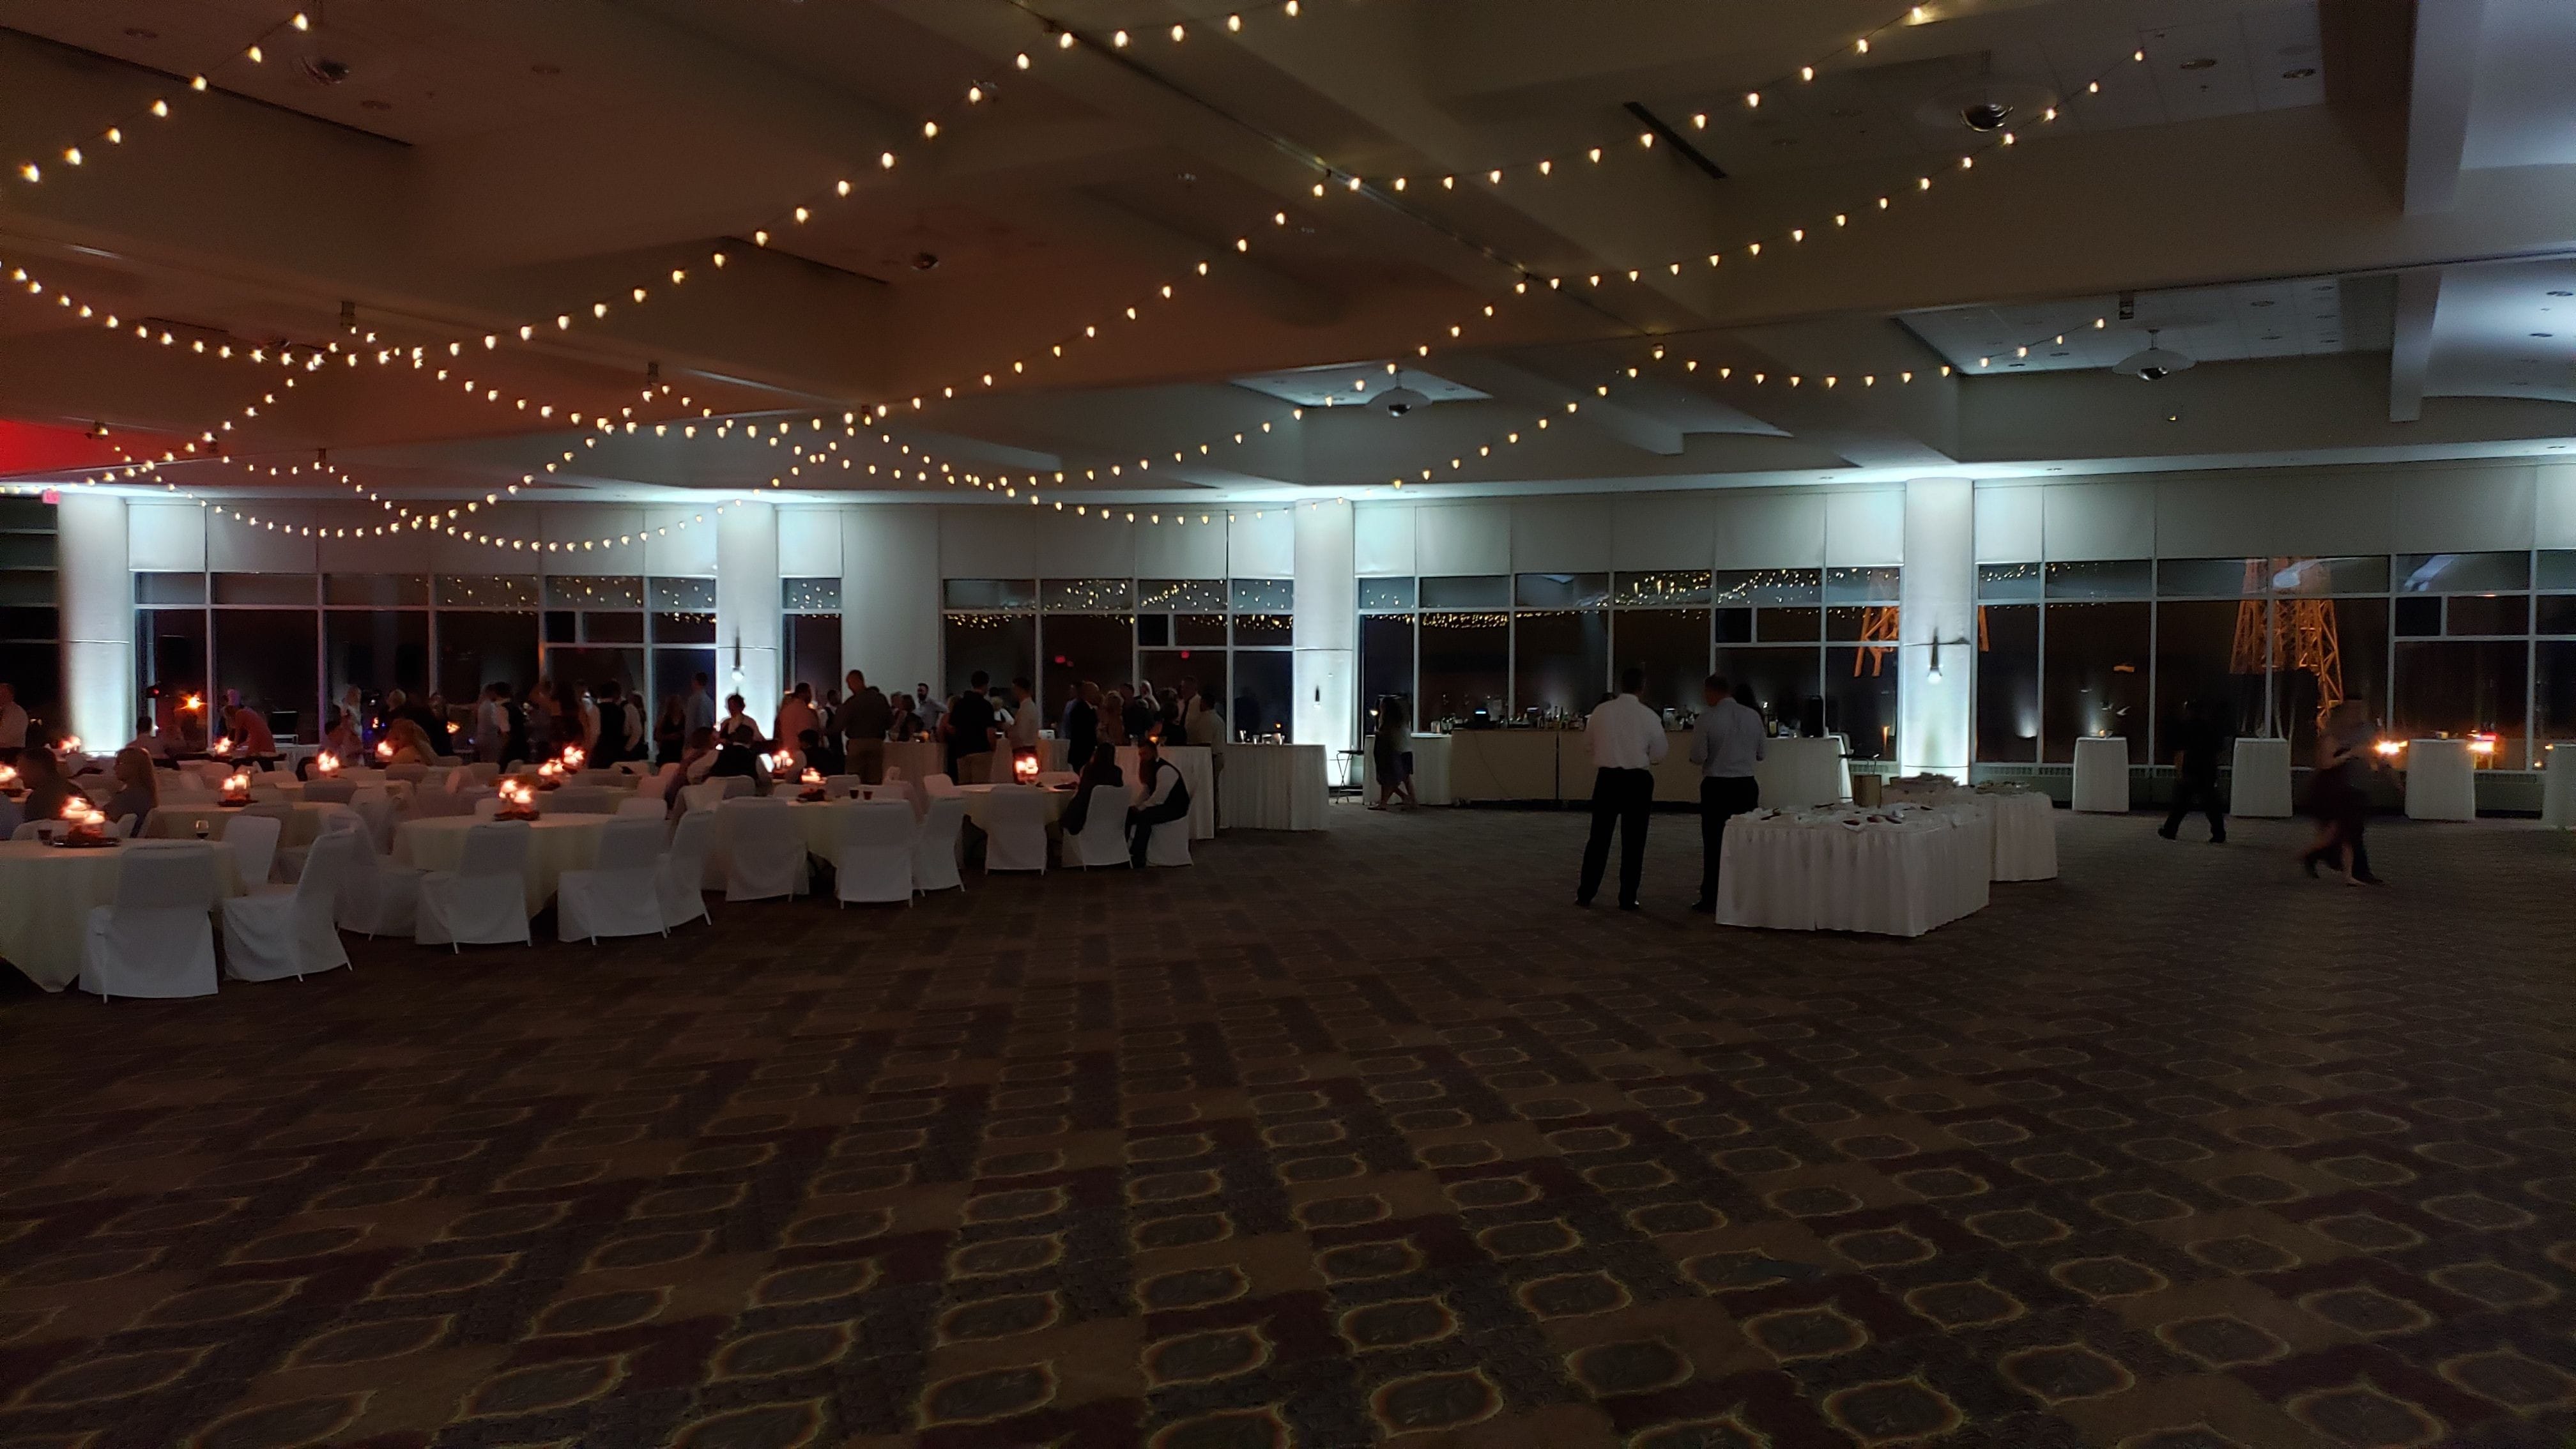 Harbor Side Ballroom at the DECC. Bistro on ceiling with white up lighting.